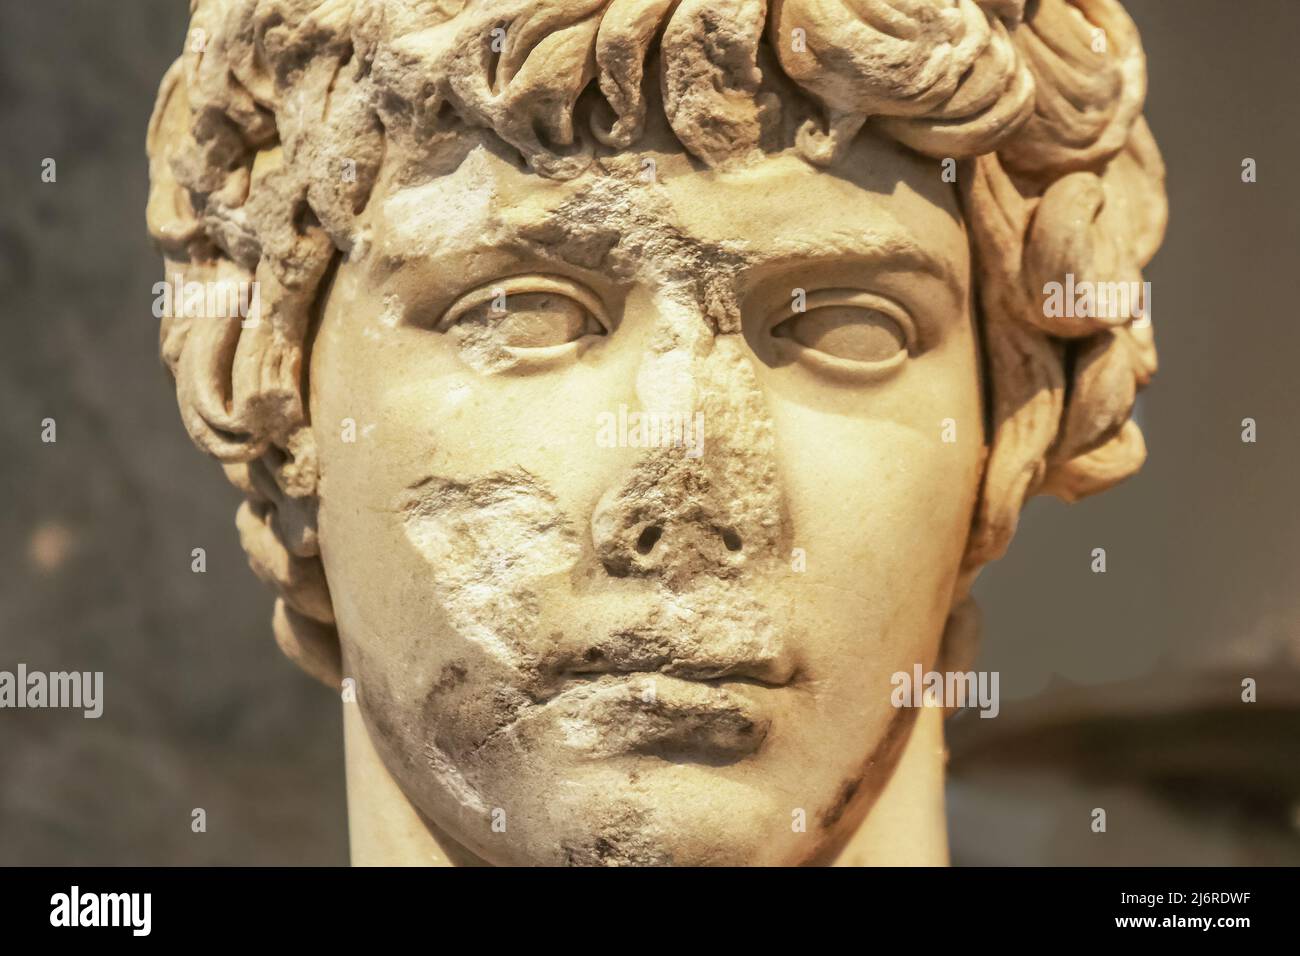 Close-up of head of ancient marble statue of attractive Greek youth with parts of face chipped off and destroyed Stock Photo